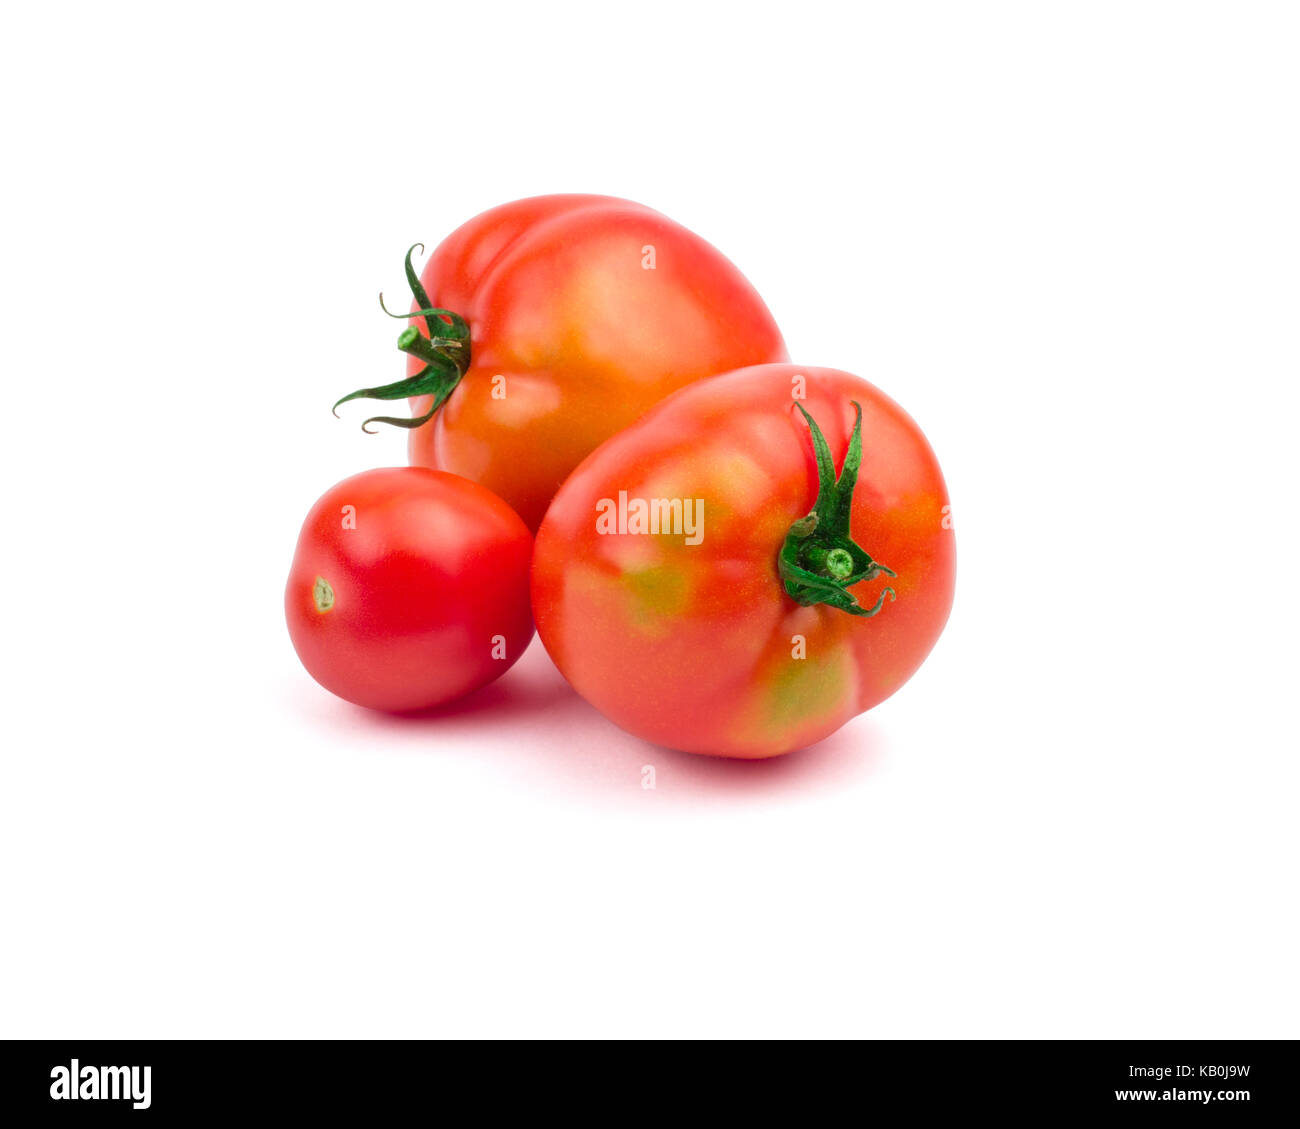 Tomatoe(s) isolated on white background. Clipping path included in jpeg. Stock Photo